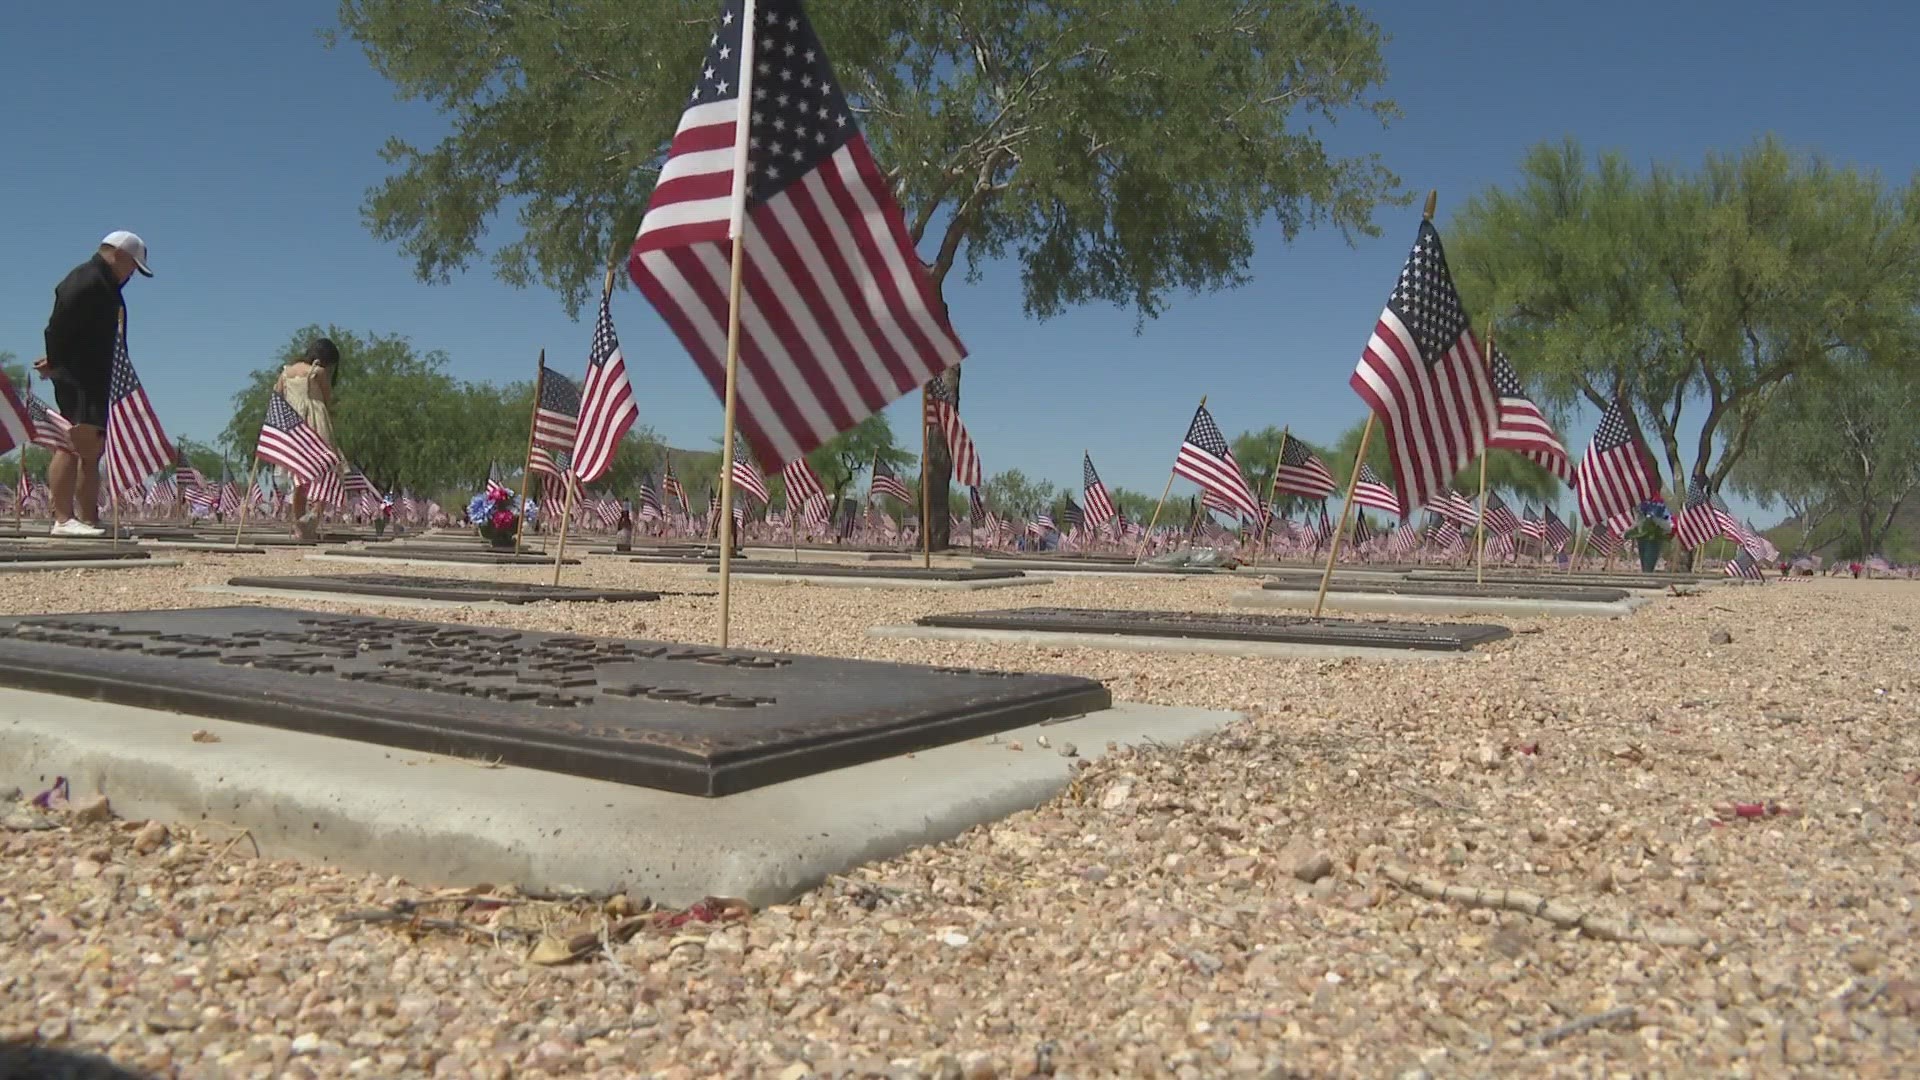 A special ceremony was held at the National Memorial Cemetery of Arizona.